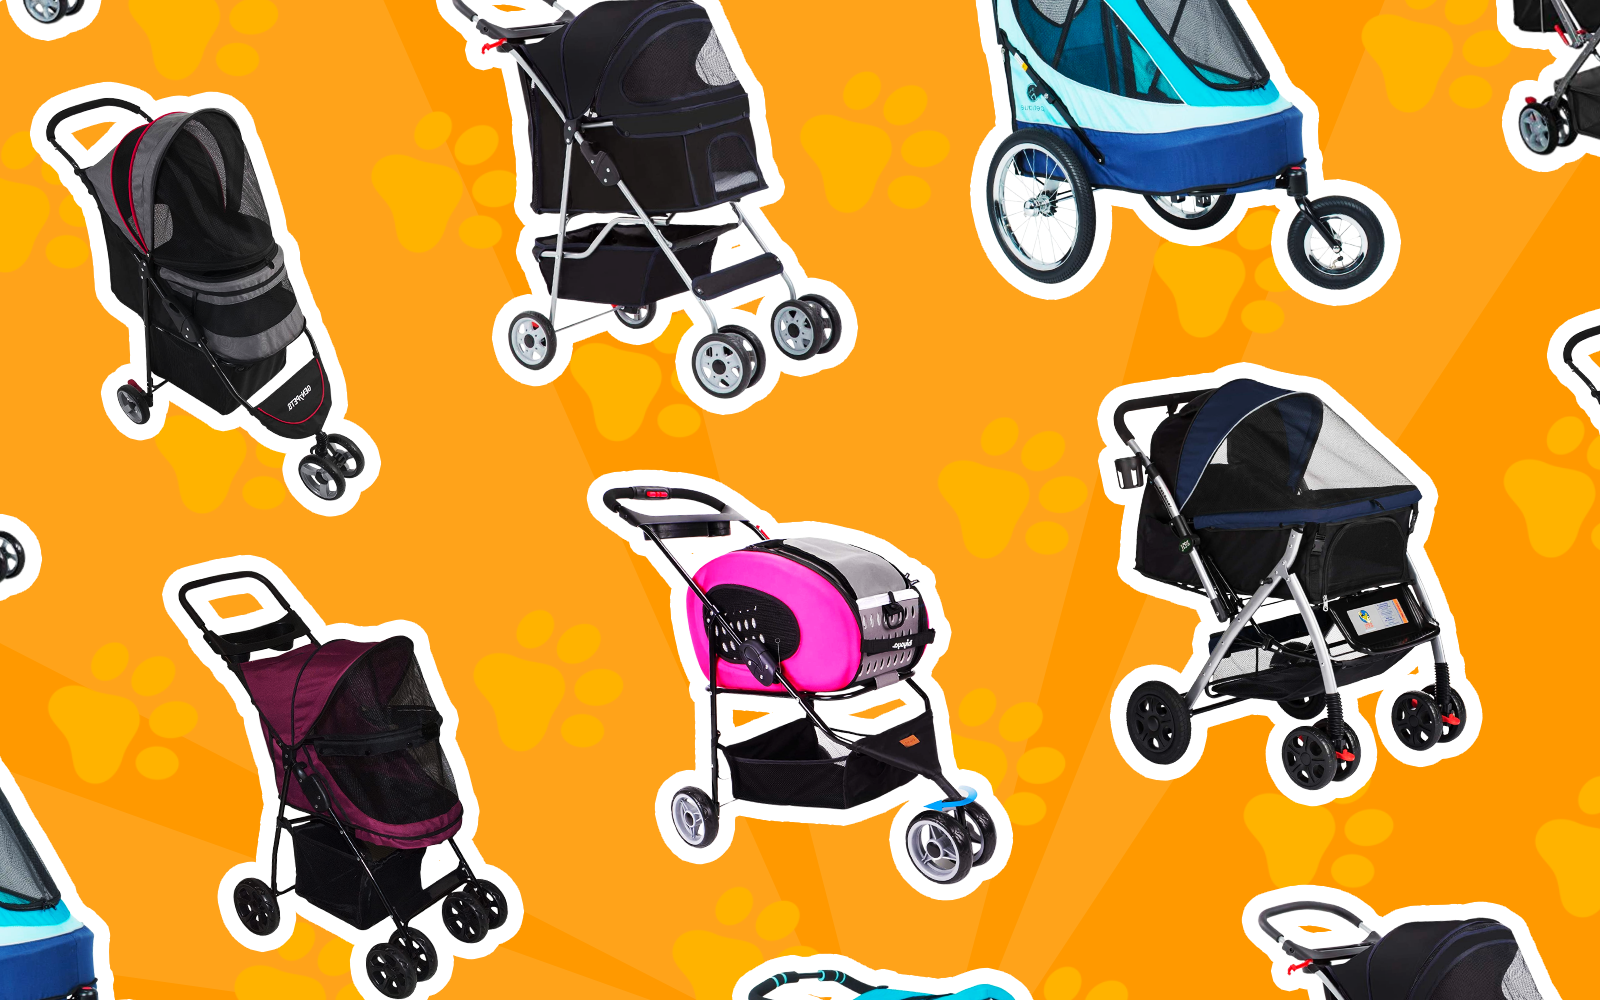 Image of several of the best dog strollers in a layflat image on an orange background